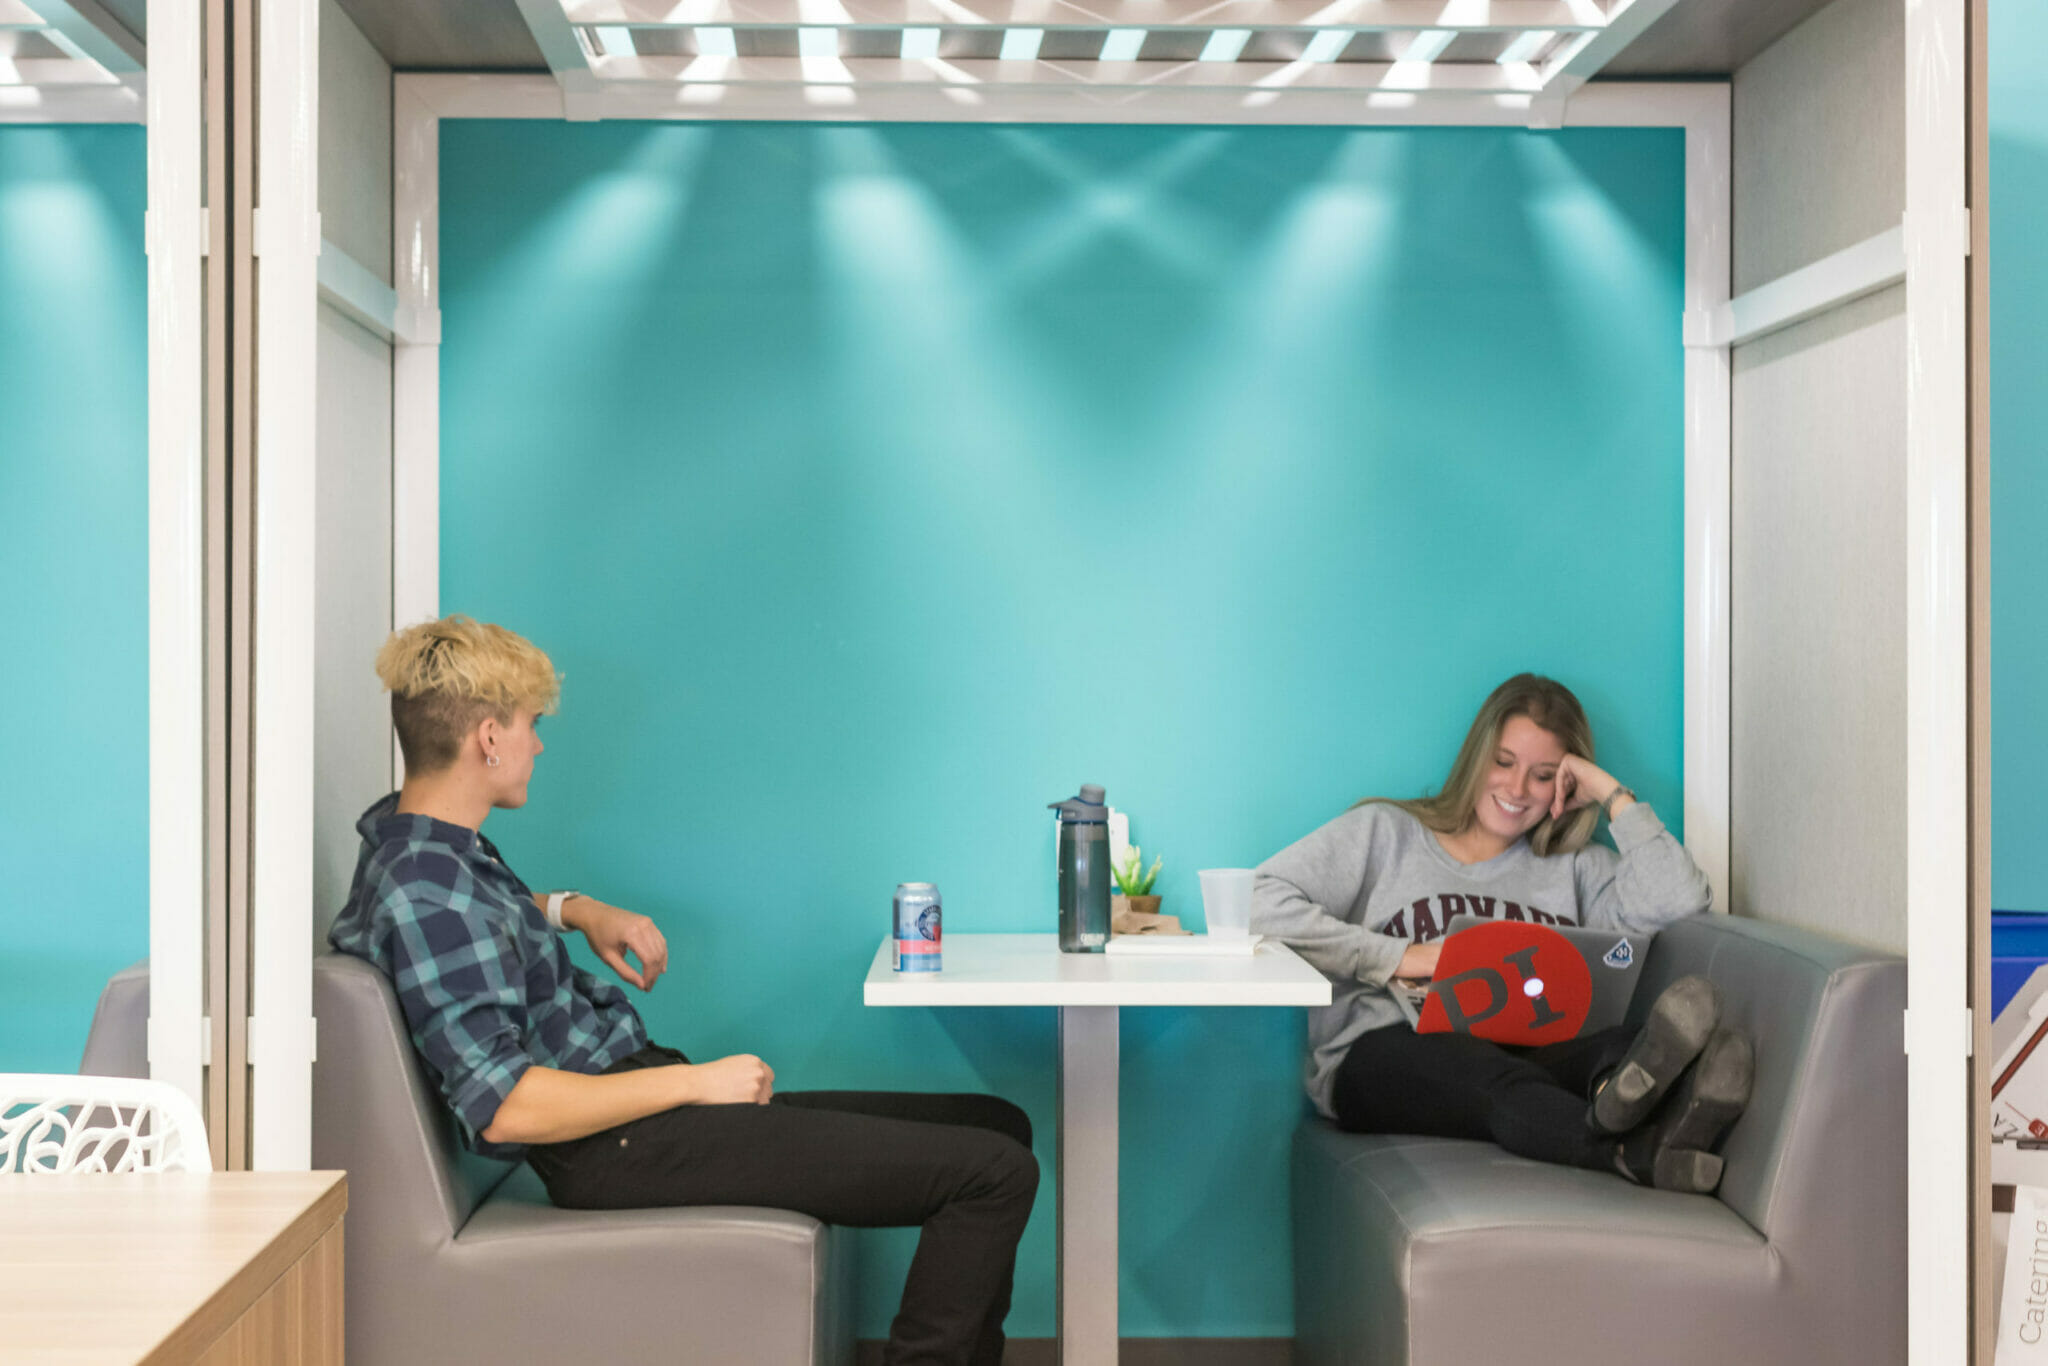 Managing millennials in the workplace means providing many casual seating options